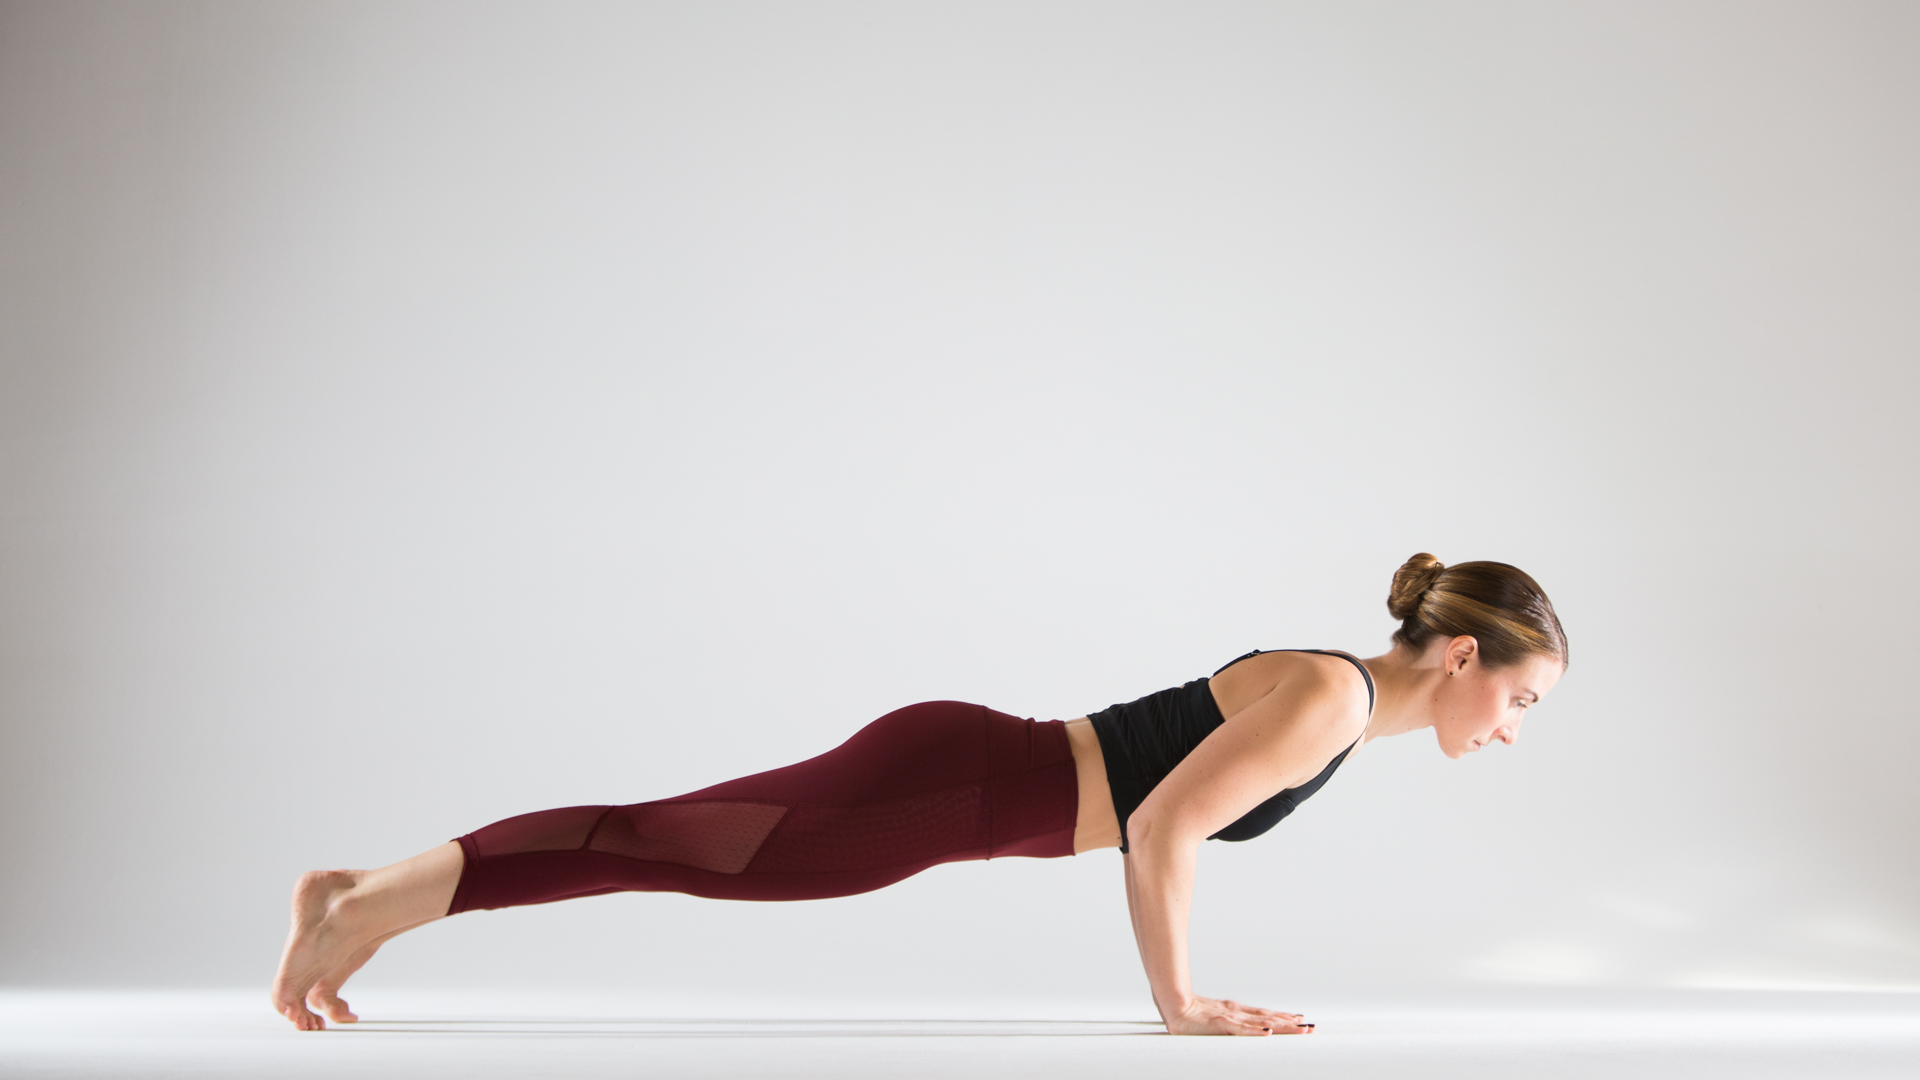 How to Plank Properly Every Time, According to Fitness Pros